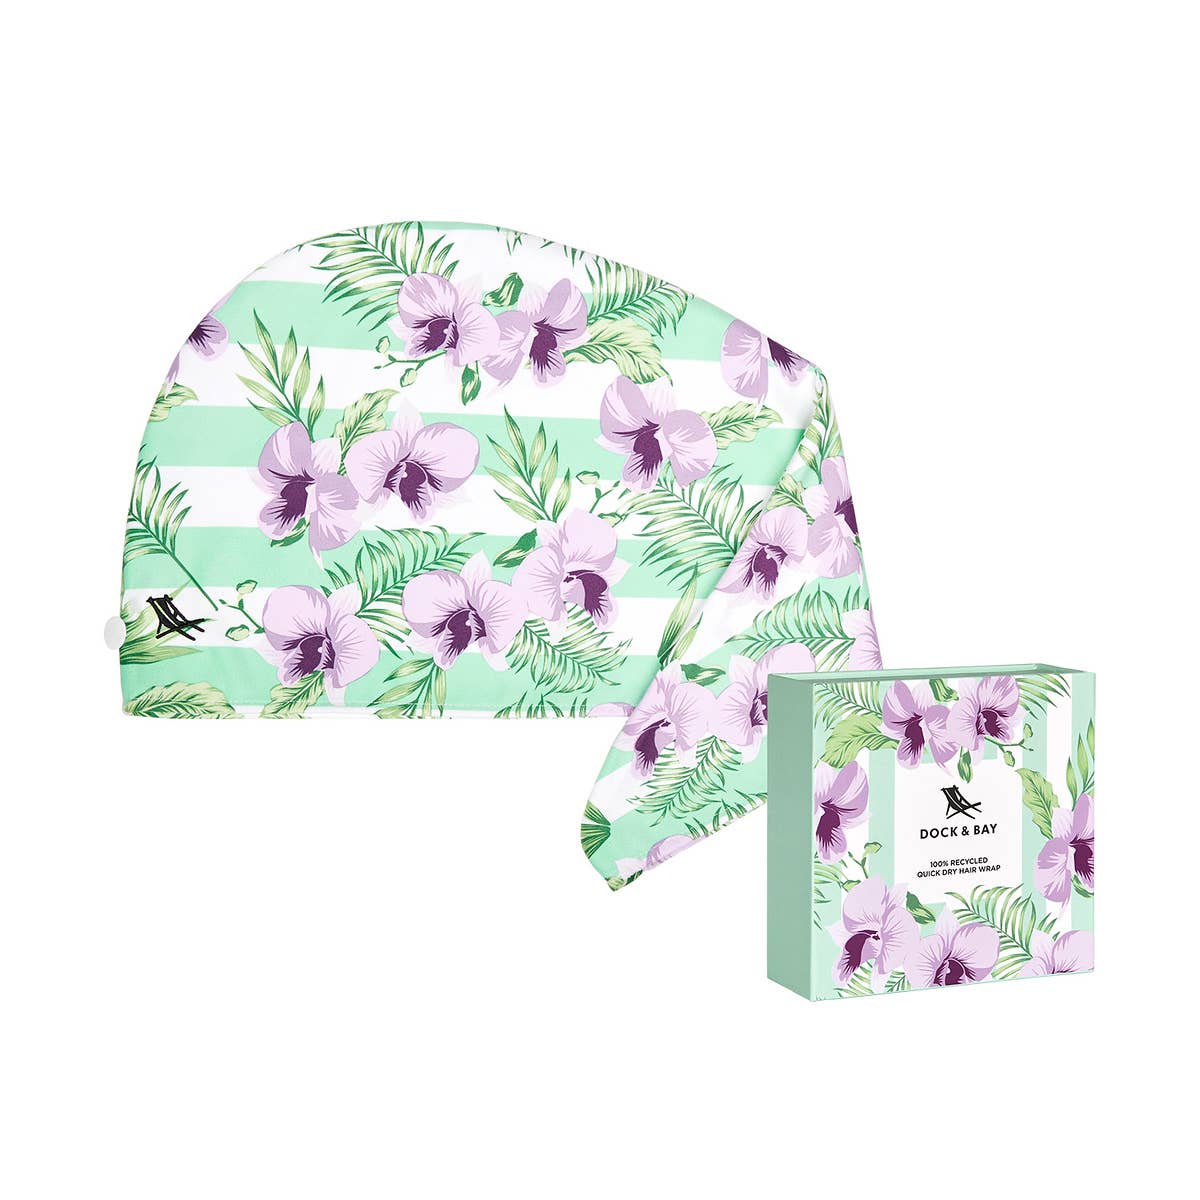 Dock & Bay Quick Dry Hair Wrap - Botanical - Orchid Utopia: Orchid Utopia / One Size